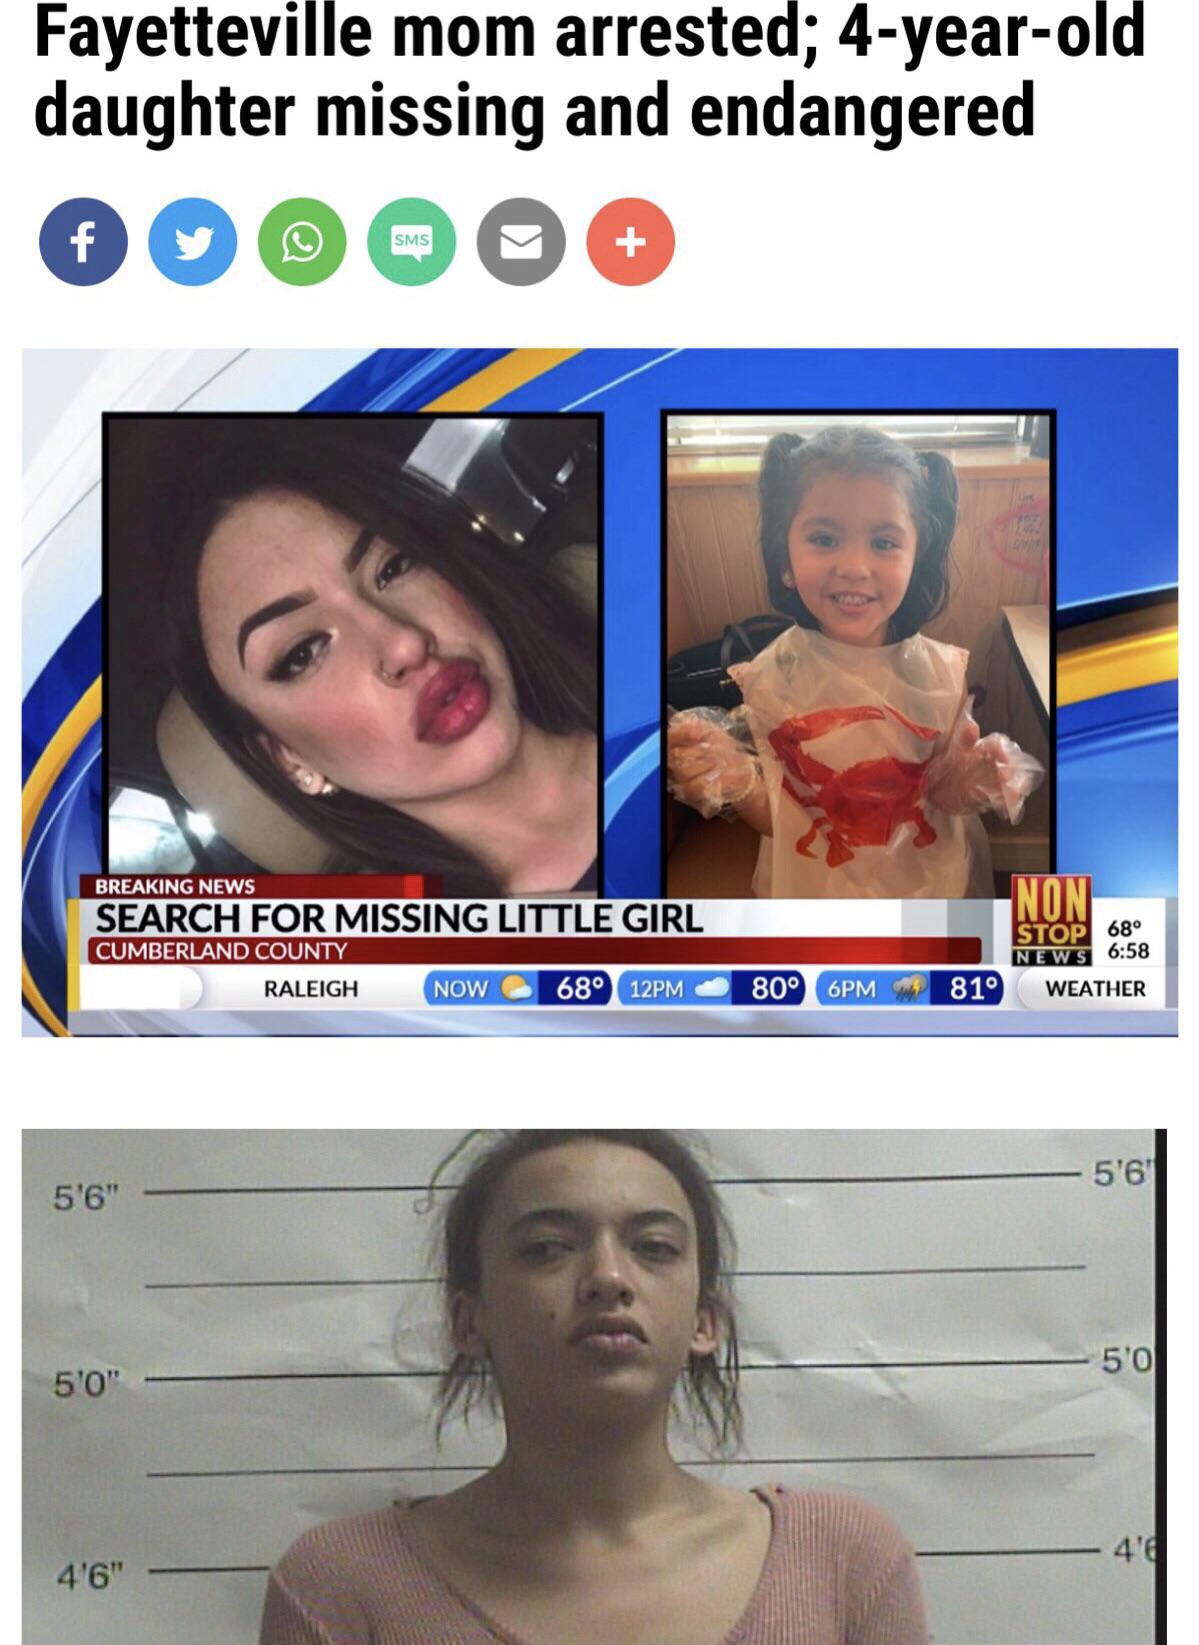 facial expression - Fayetteville mom arrested; 4yearold daughter missing and endangered Sms Non Breaking News Search For Missing Little Girl Cumberland County Raleigh